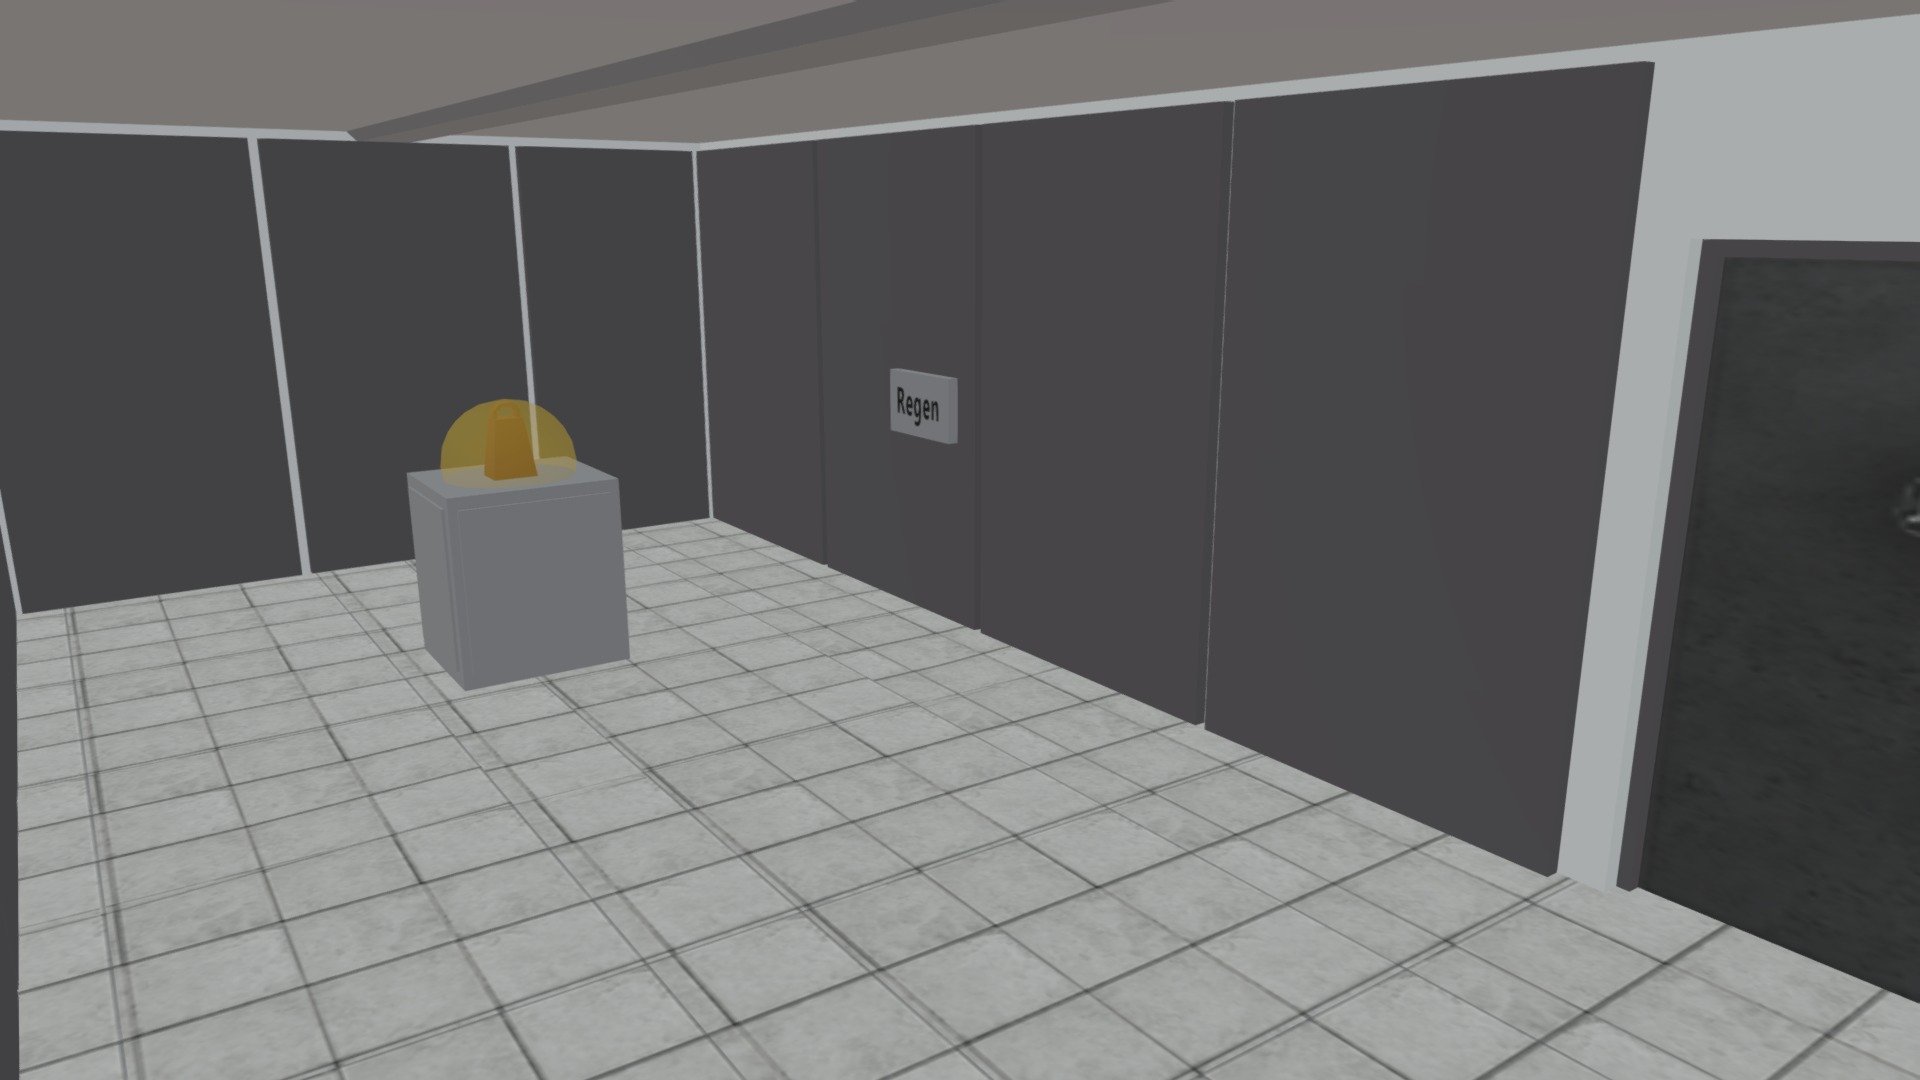 SCP-173's Chamber - Roblox